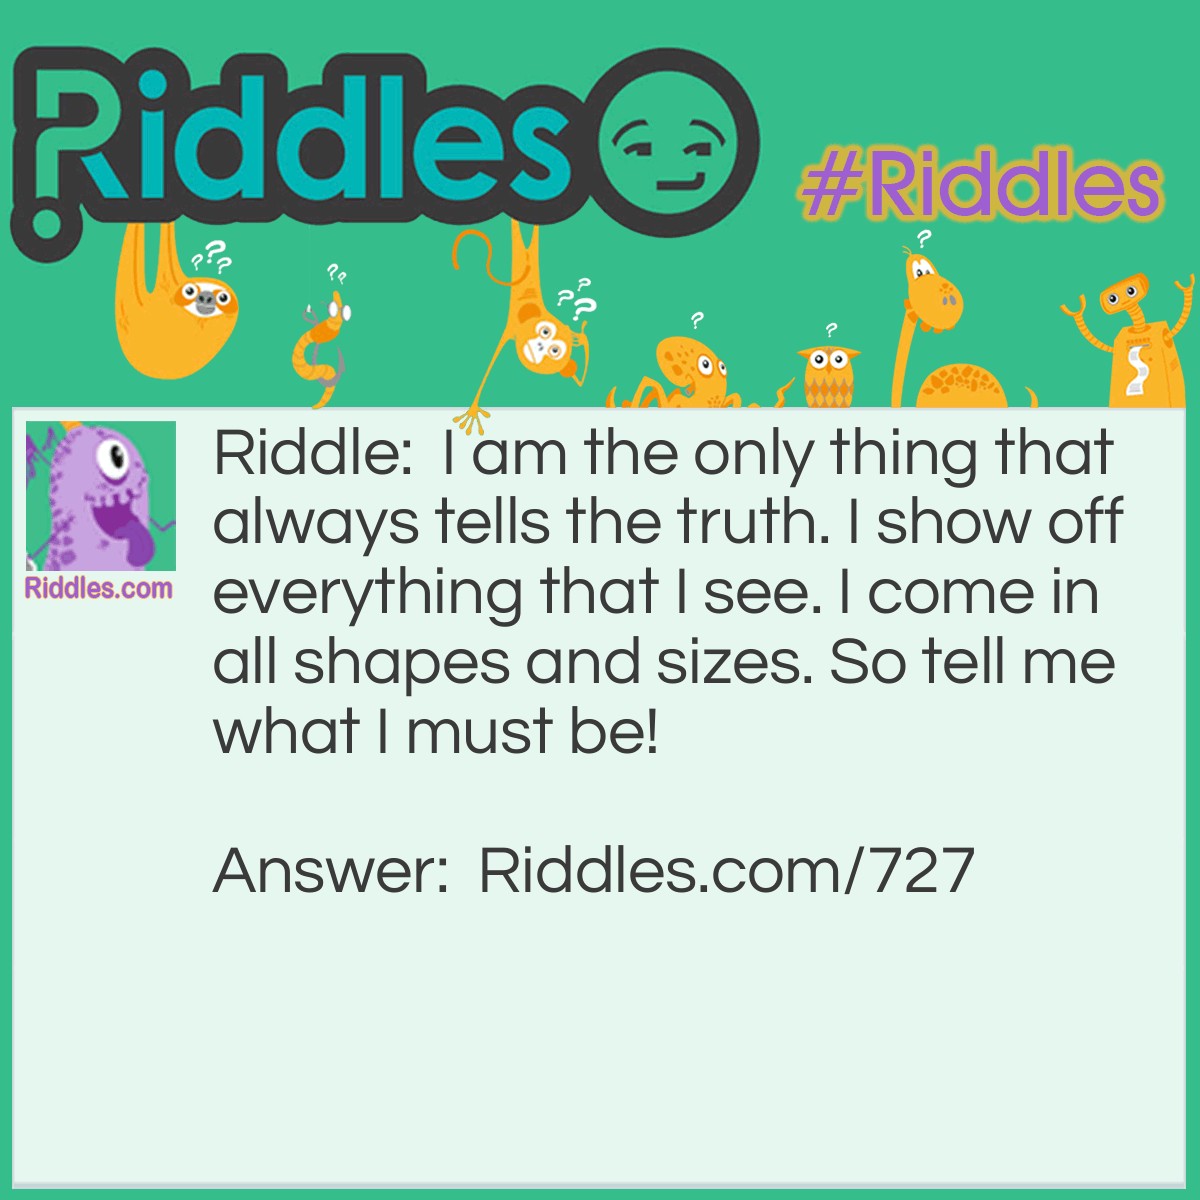 Riddle: I am the only thing that always tells the truth. I show off everything that I see. I come in all shapes and sizes. So tell me what I must be! What am I? Answer: I must be a mirror, of course.